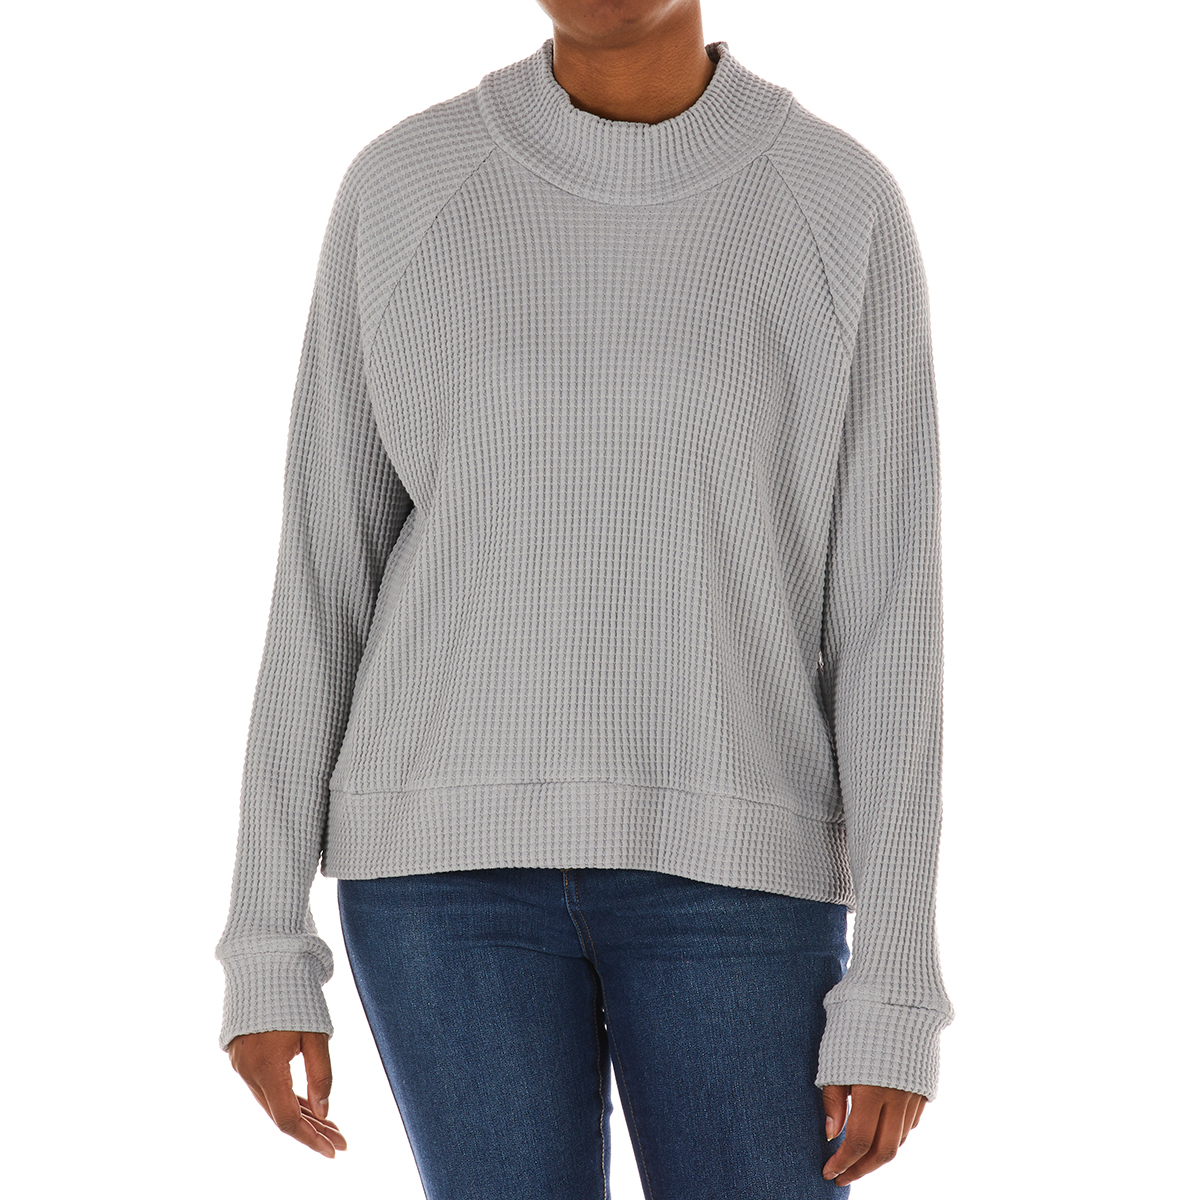 The North Face Women's Long-Sleeve Mock Neck Chabot - Size XL